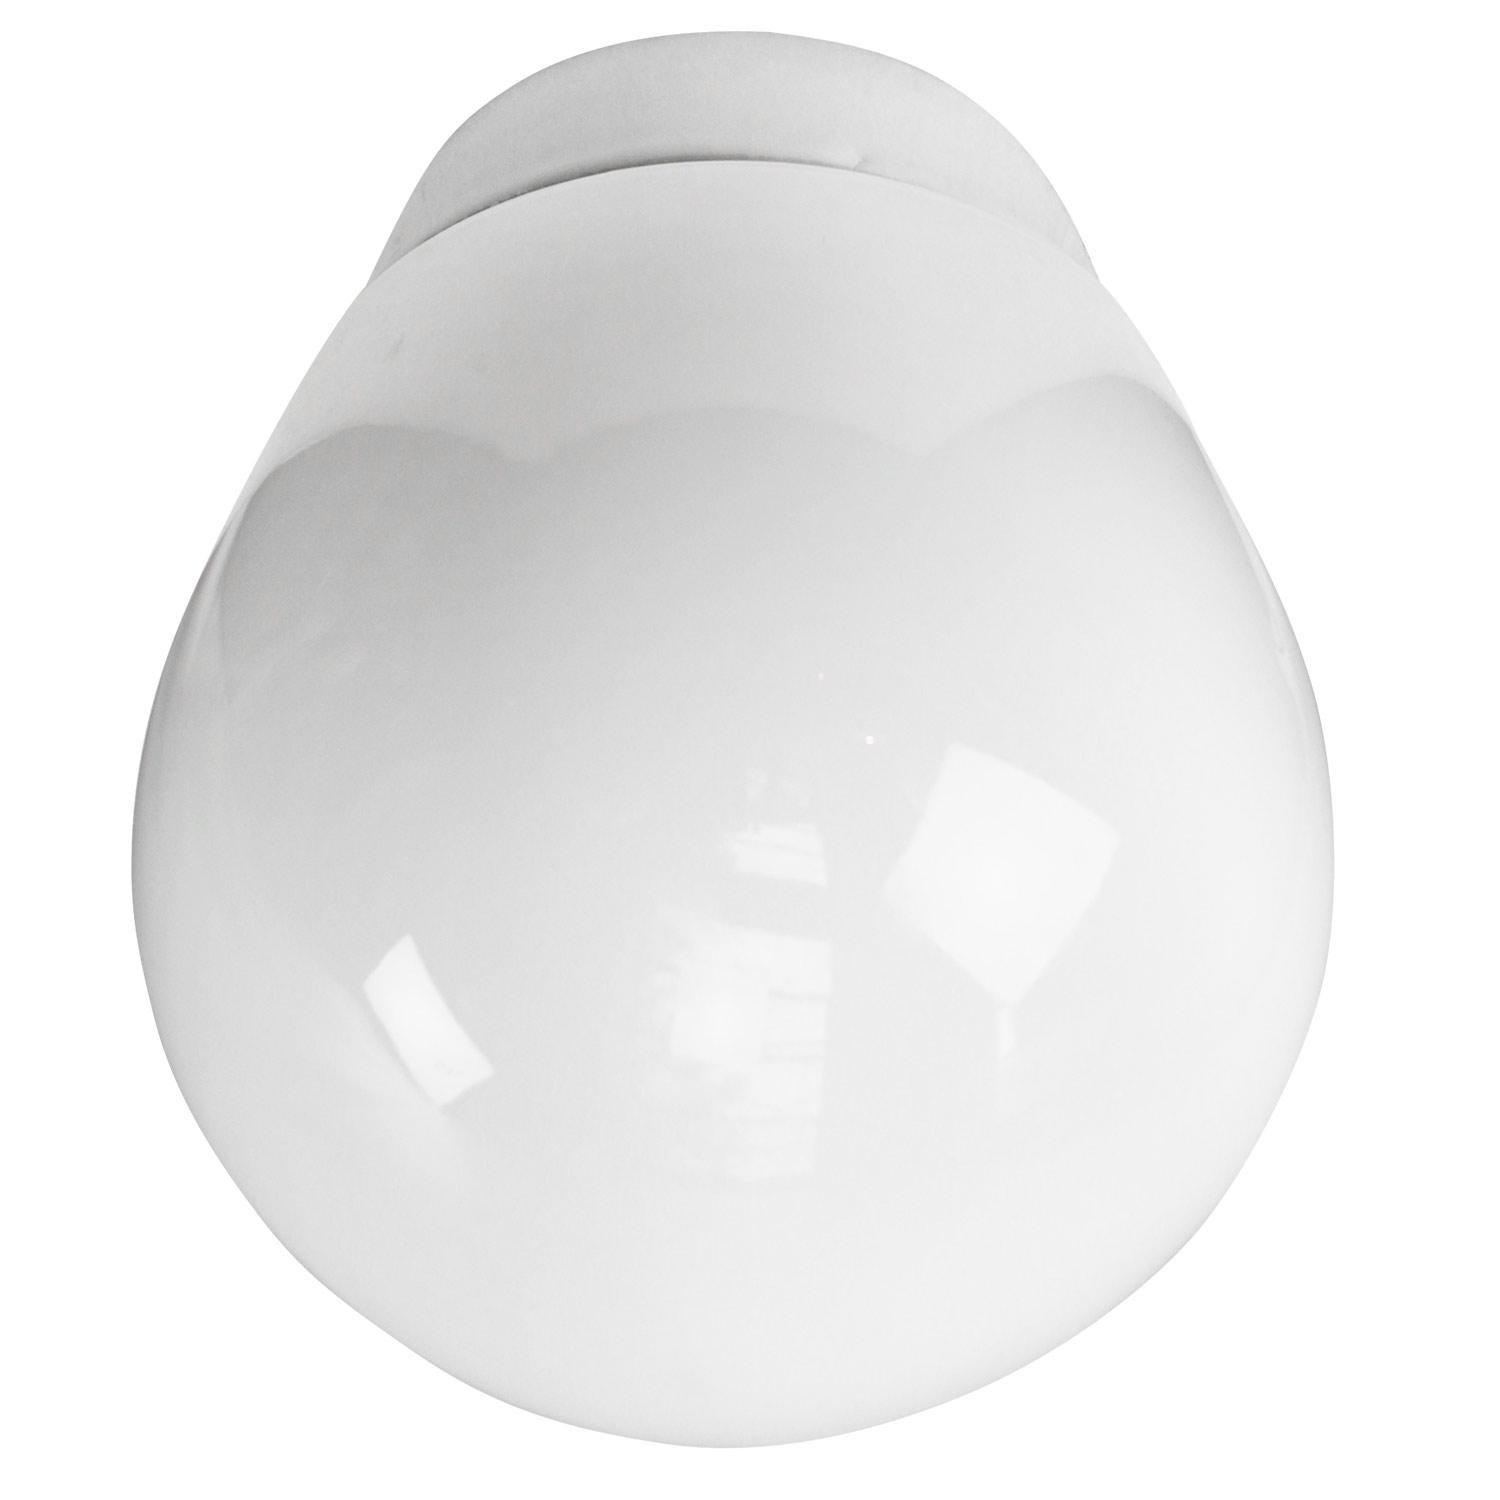 Porcelain wall lamp / scone by Lindner no. 6002
Designed by Wilhelm Wagenfeld
White porcelain, white opaline glass.

2 conductors, no ground.
Measures: Diameter foot 85 mm
Suitable for 110 volt USA
New wiring is UL listed (110 volt) or CE